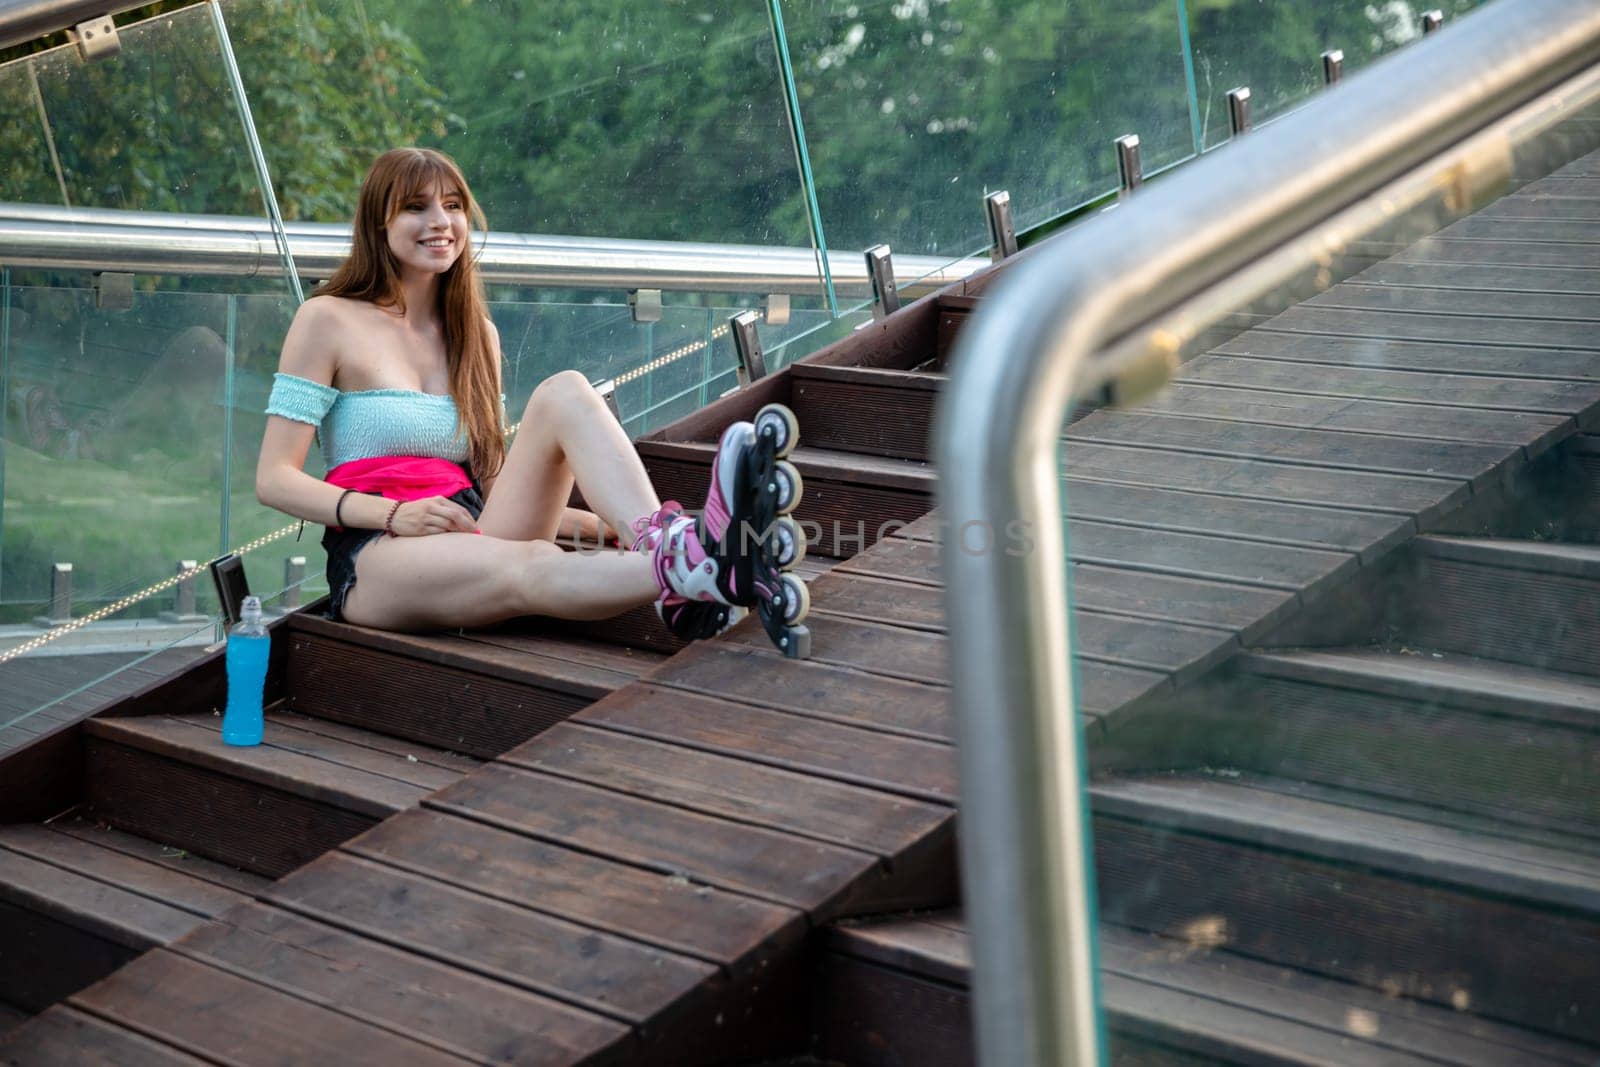 A girl relaxes after rollerblading. A woman sits on a wooden staircase and leans against a glass balustrade. Beside her stands a bottle of blue isotonic drink. In the blurred foreground you can see the railing